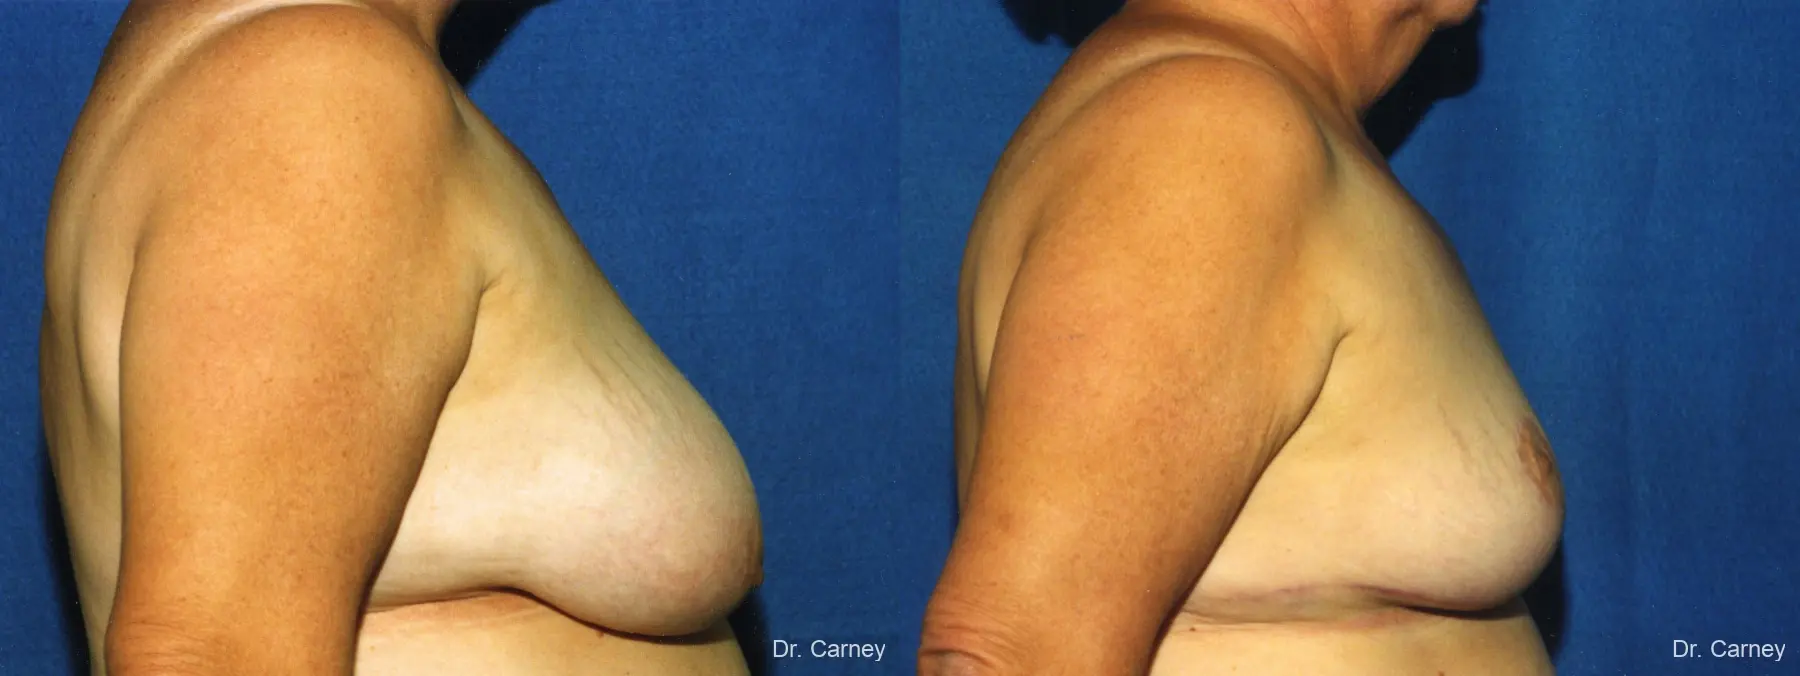 Virginia Beach Breast Reduction 1234 - Before and After 2